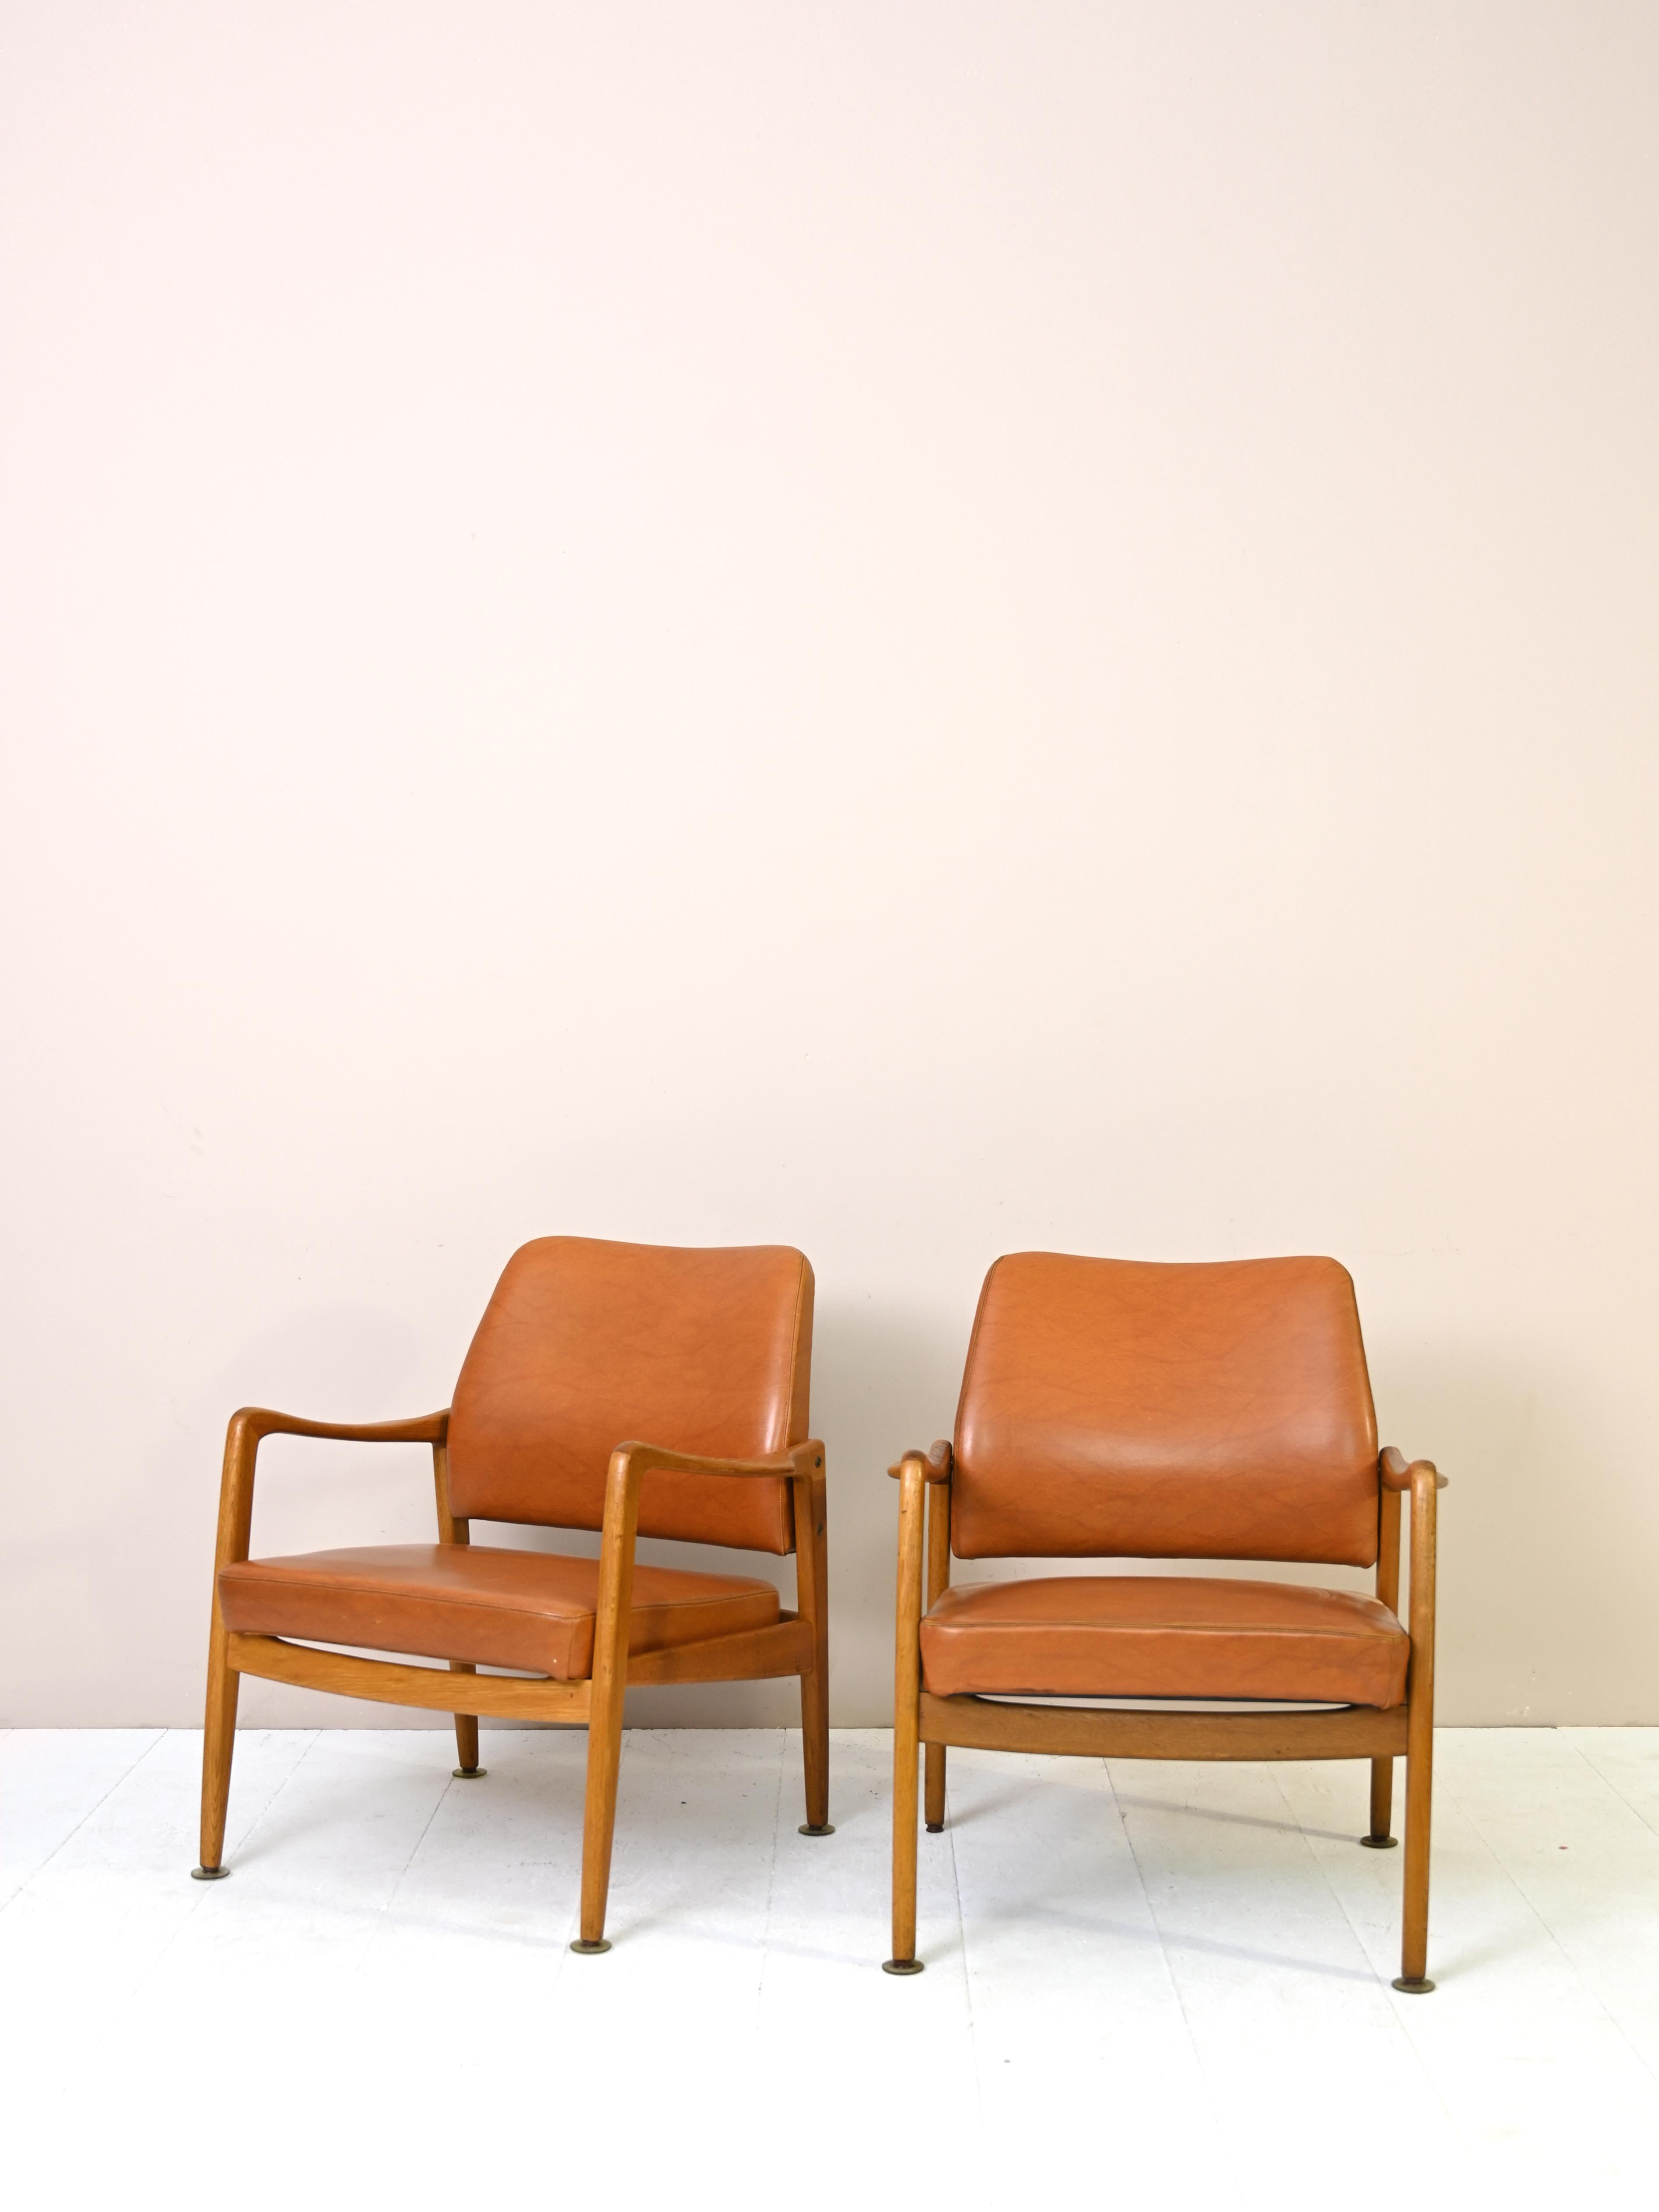 Pair of original Scandinavian armchairs from the 1950s made of teak wood and cognac-colored leather.

These comfortable and timelessly beautiful seats can be placed in a living room or bedroom and will give the room a Nordic and elegant